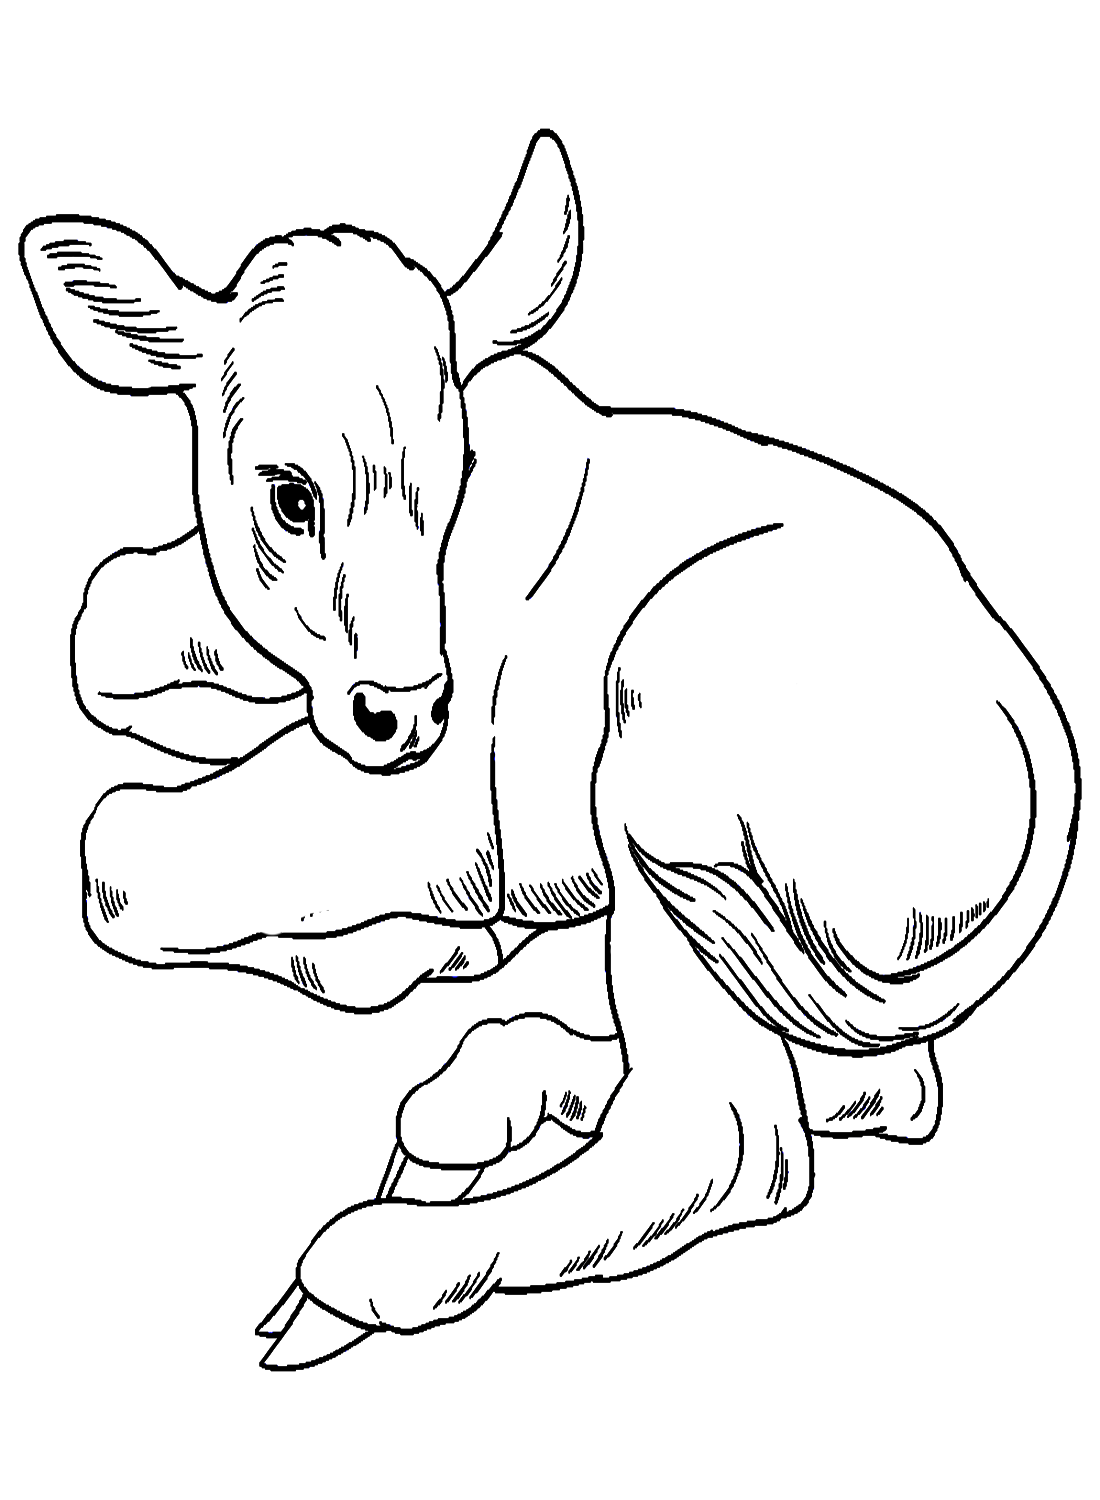 Hand Drawn Calf Lying On Ground from Calf